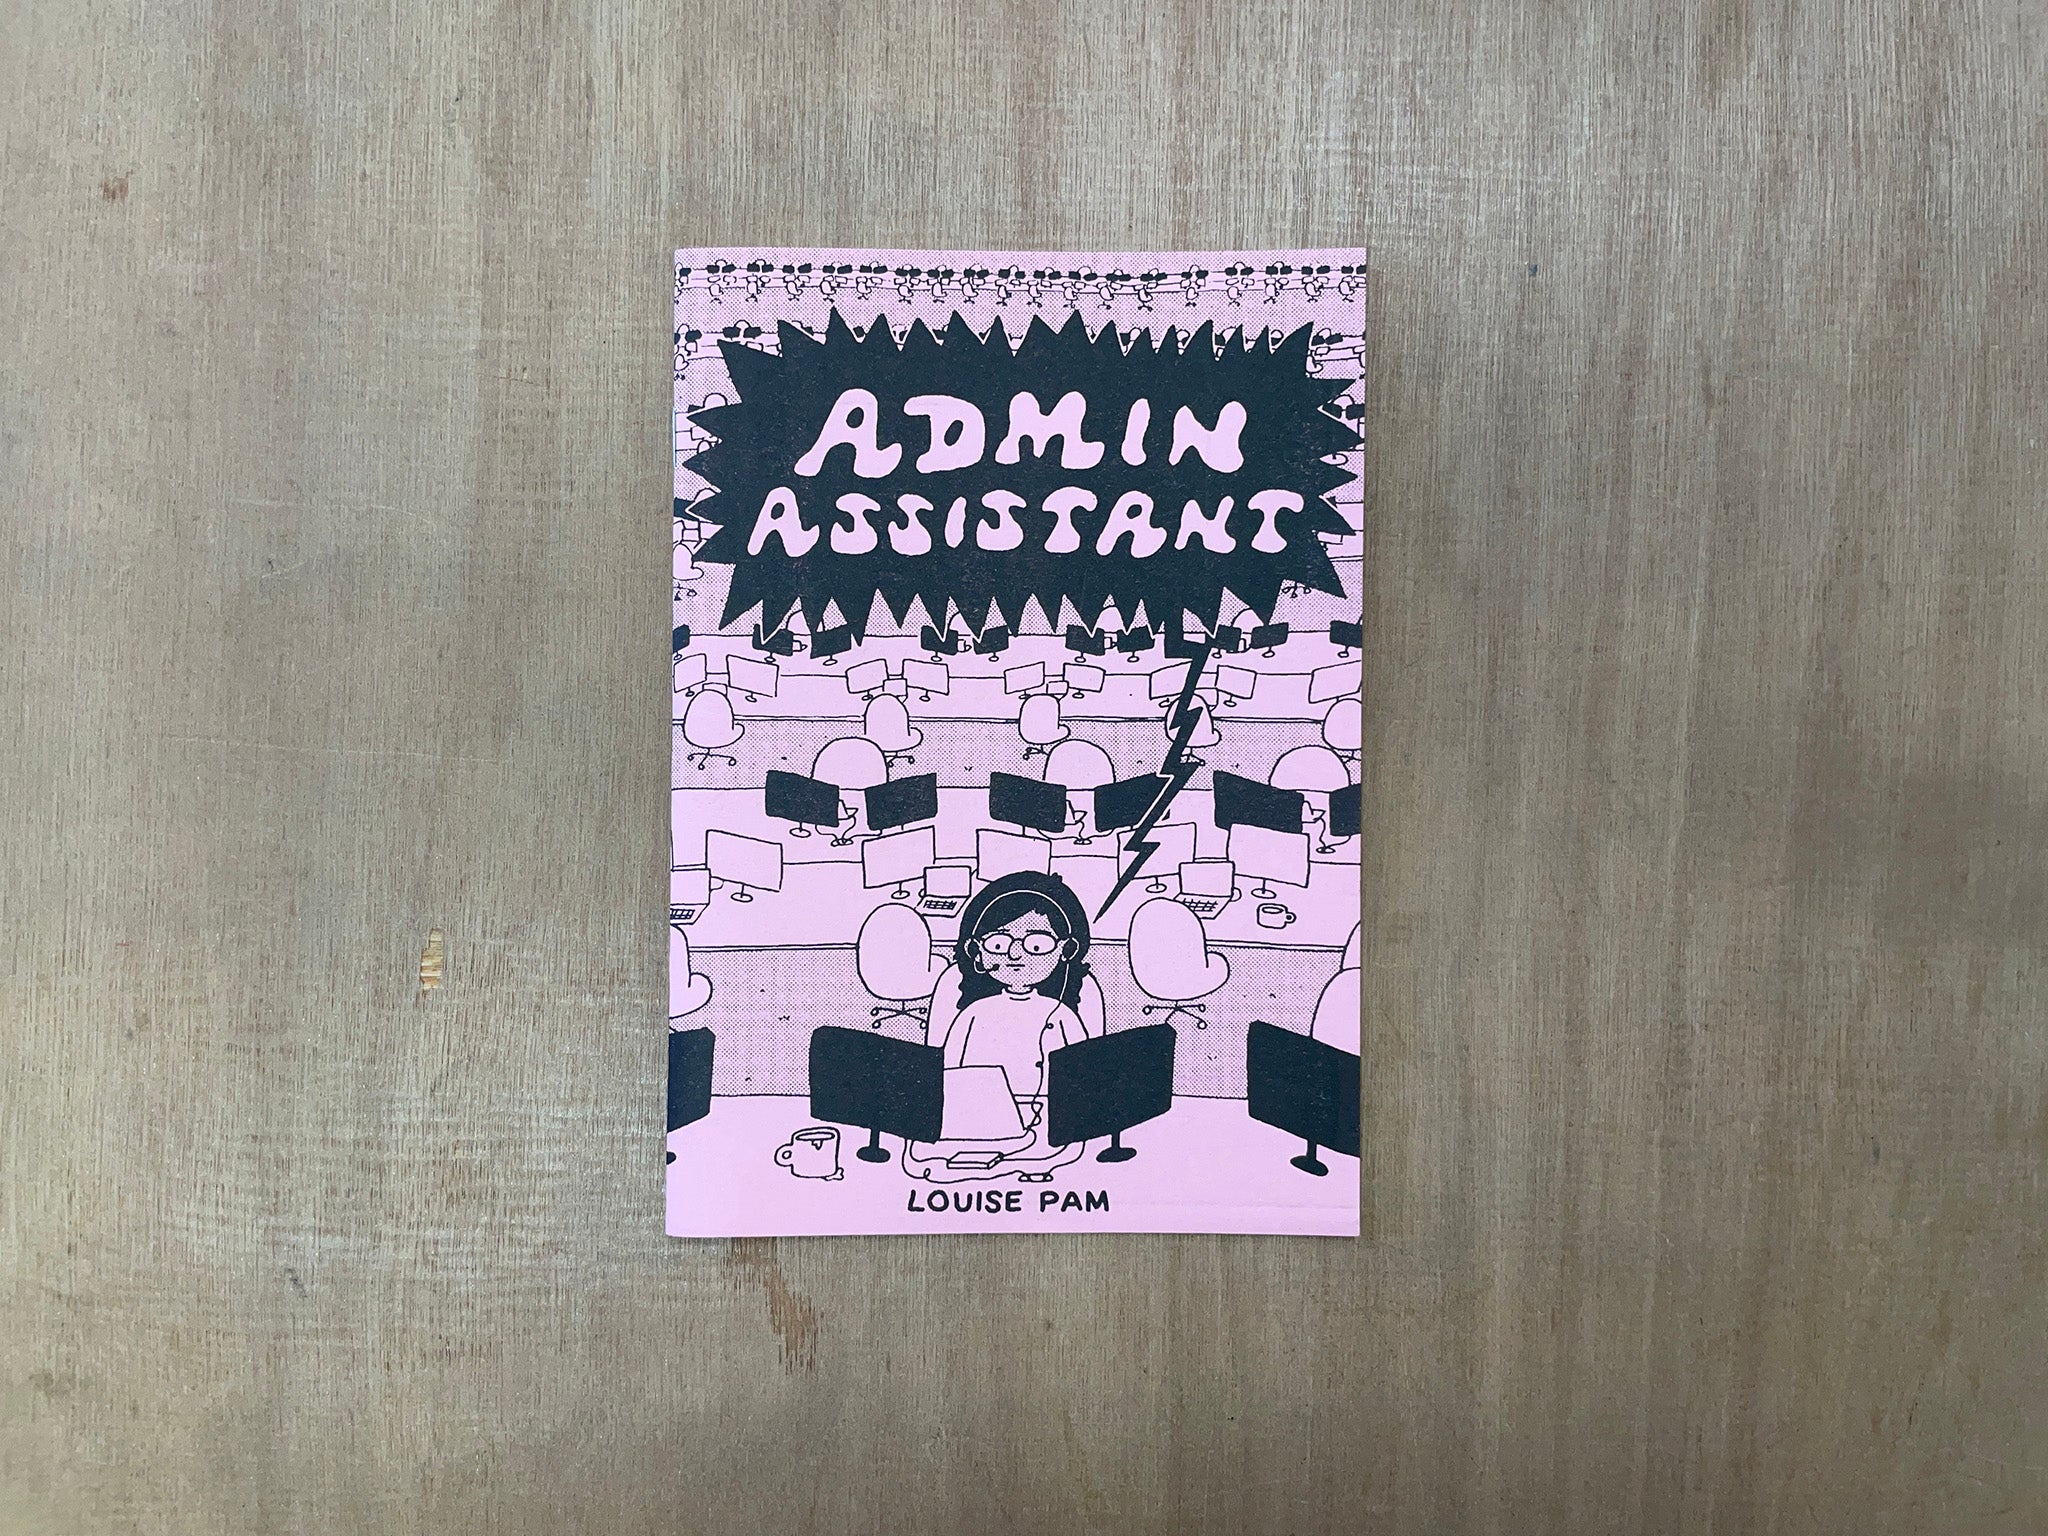 ADMIN ASSISTANT by Louise Pam